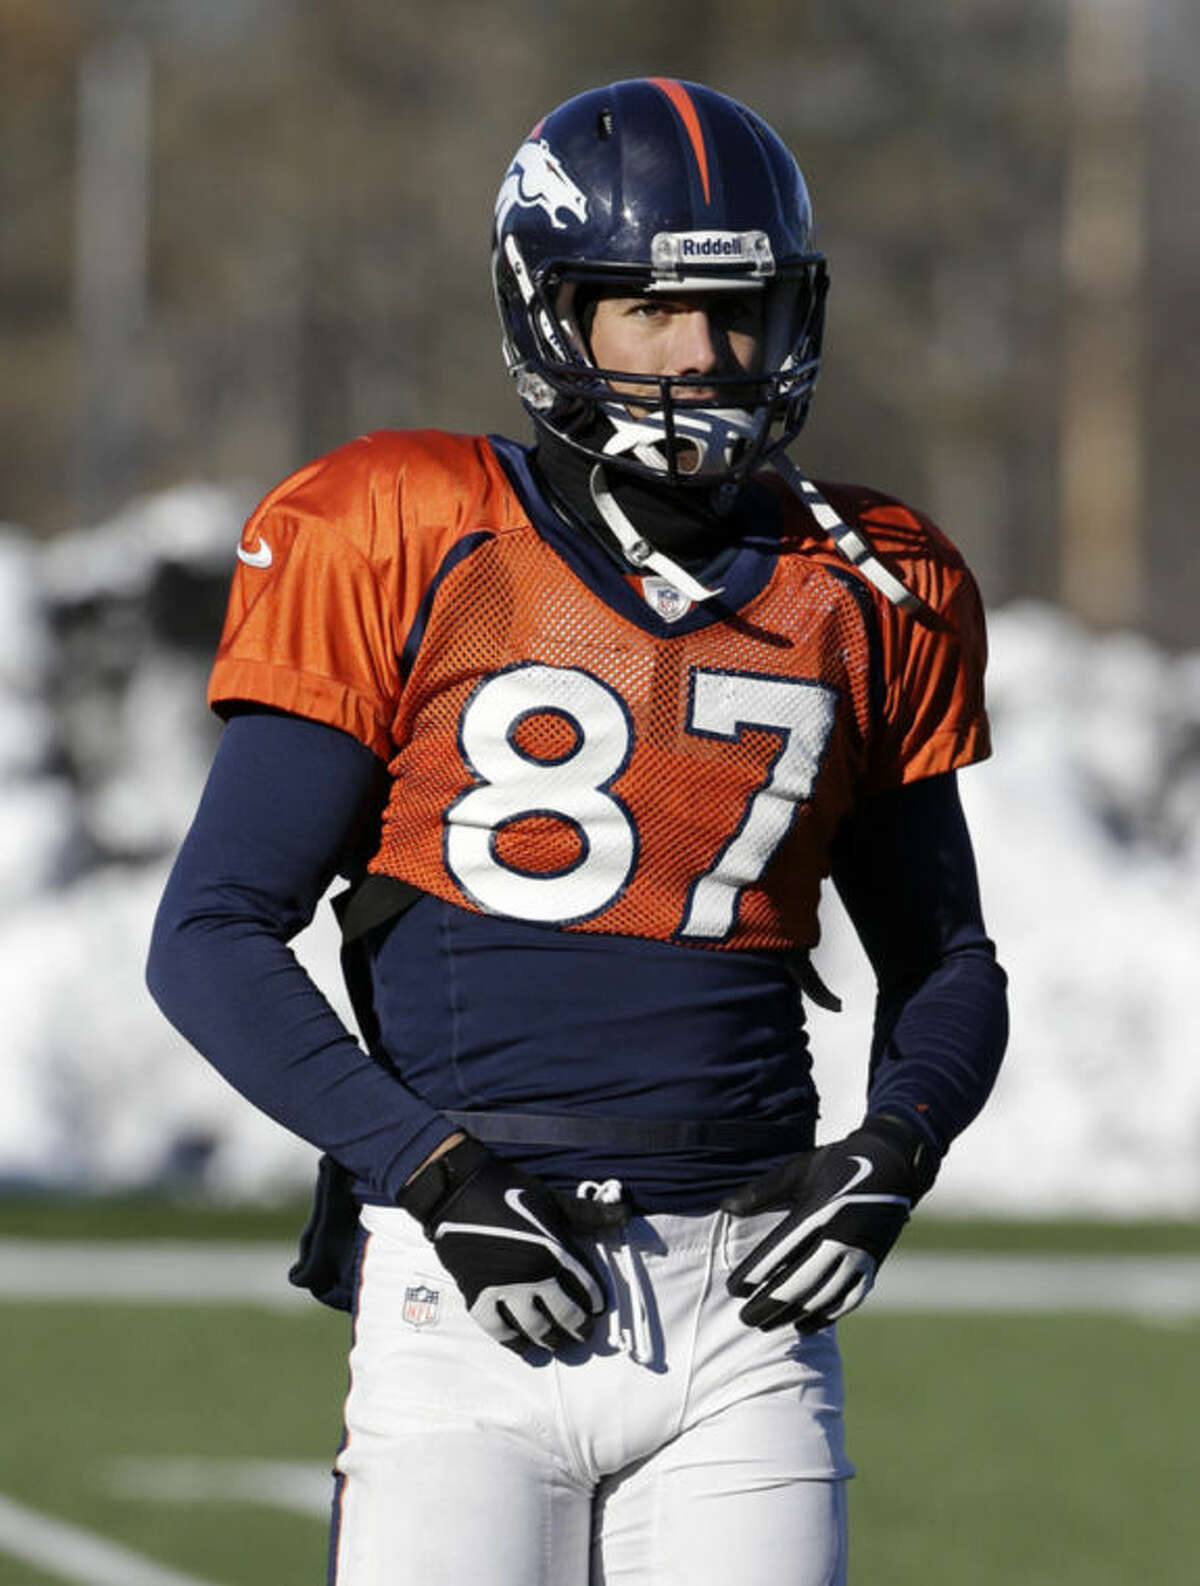 Denver Broncos wide receiver Eric Decker gets set to run a drill during practice Wednesday, Jan. 29, 2014, in Florham Park, N.J. The Broncos are scheduled to play the Seattle Seahawks in the NFL Super Bowl XLVIII football game Sunday, Feb. 2, in East Rutherford, N.J. (AP Photo/Mark Humphrey)